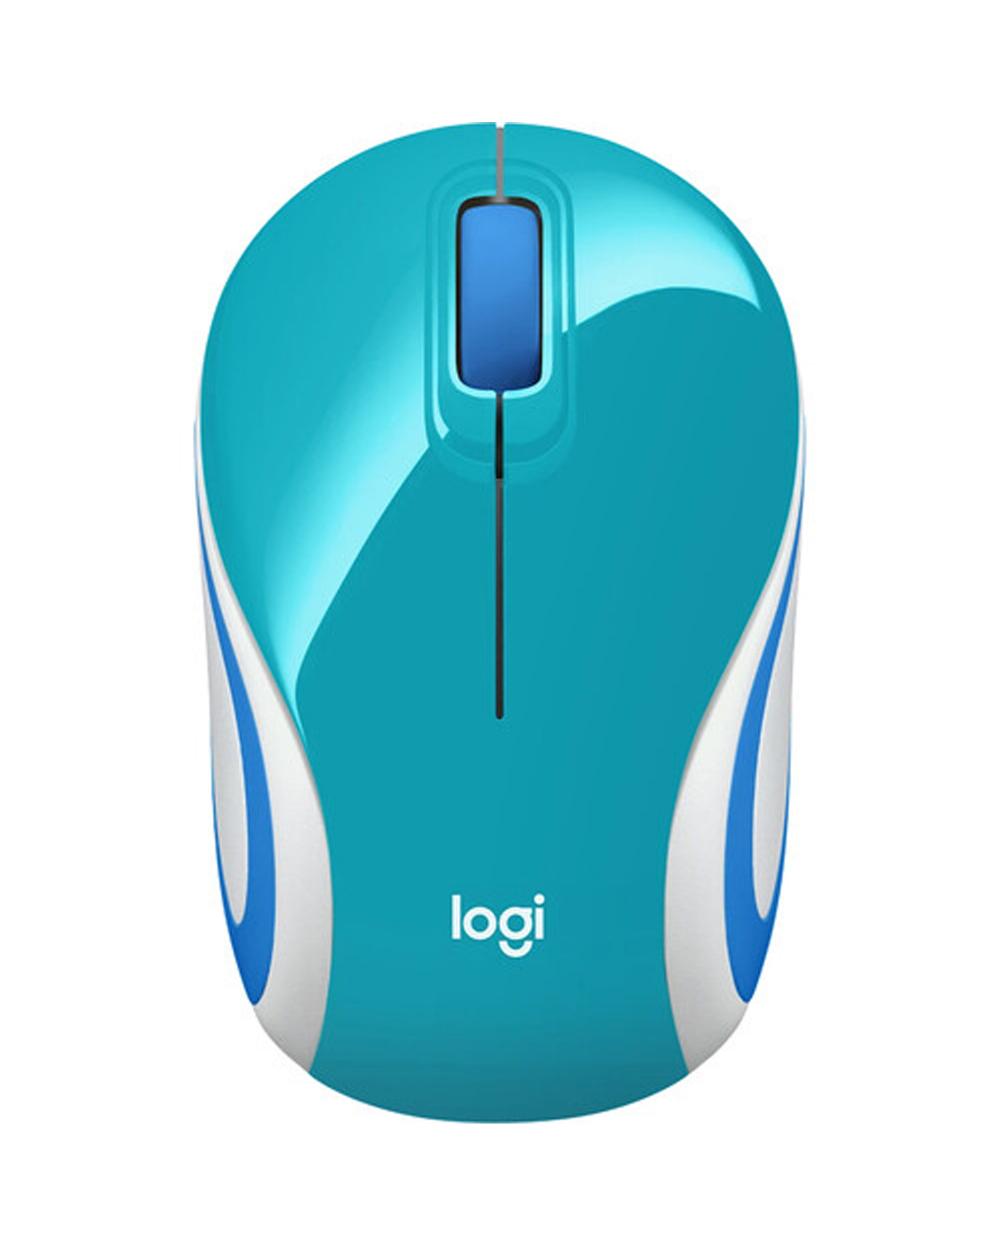 Logitech Wireless Ultra Portable Mouse 2.4 GHz - Assorted Colors